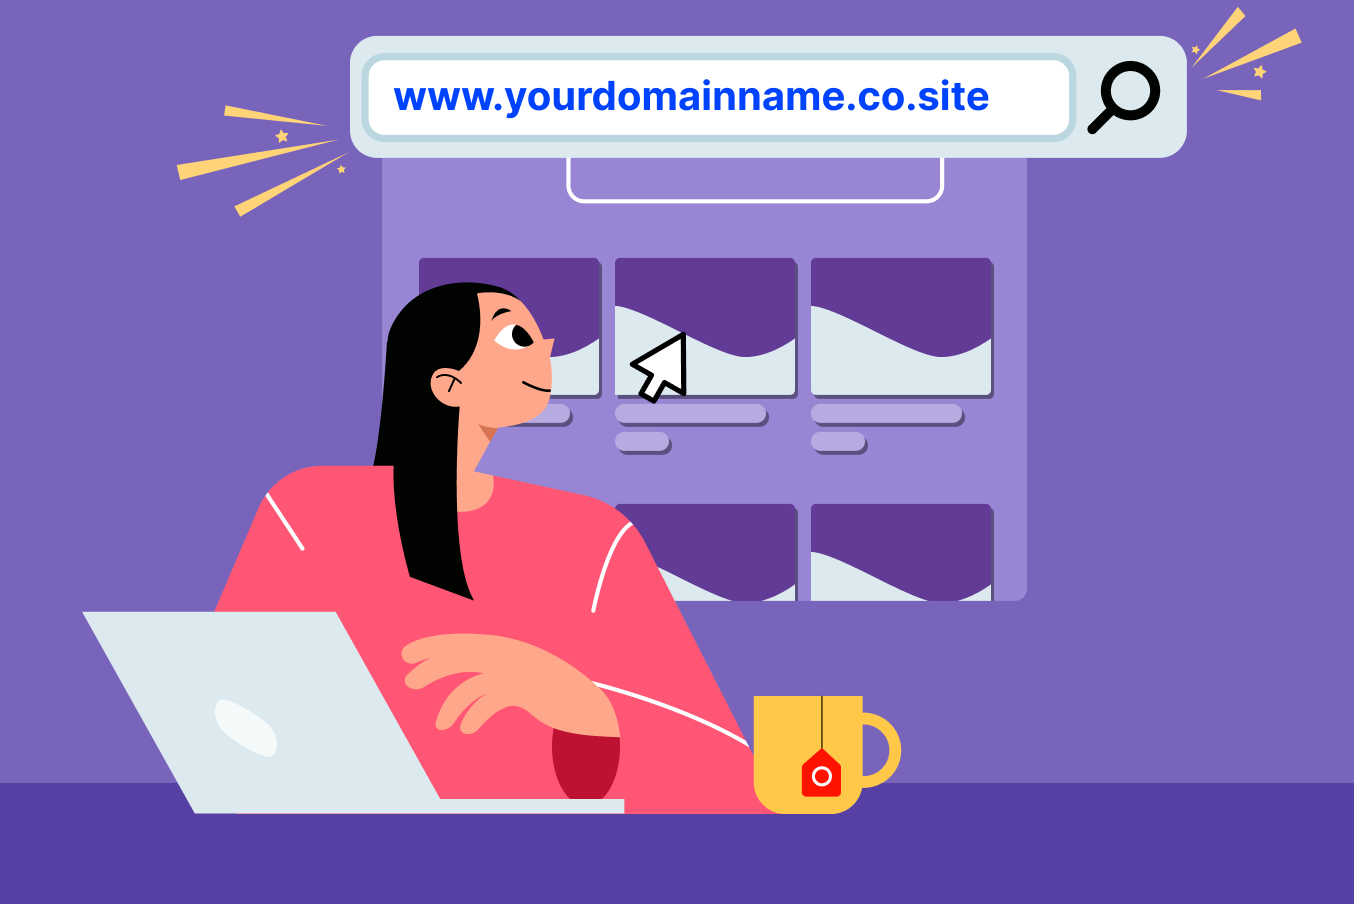 Email Domain Name Address